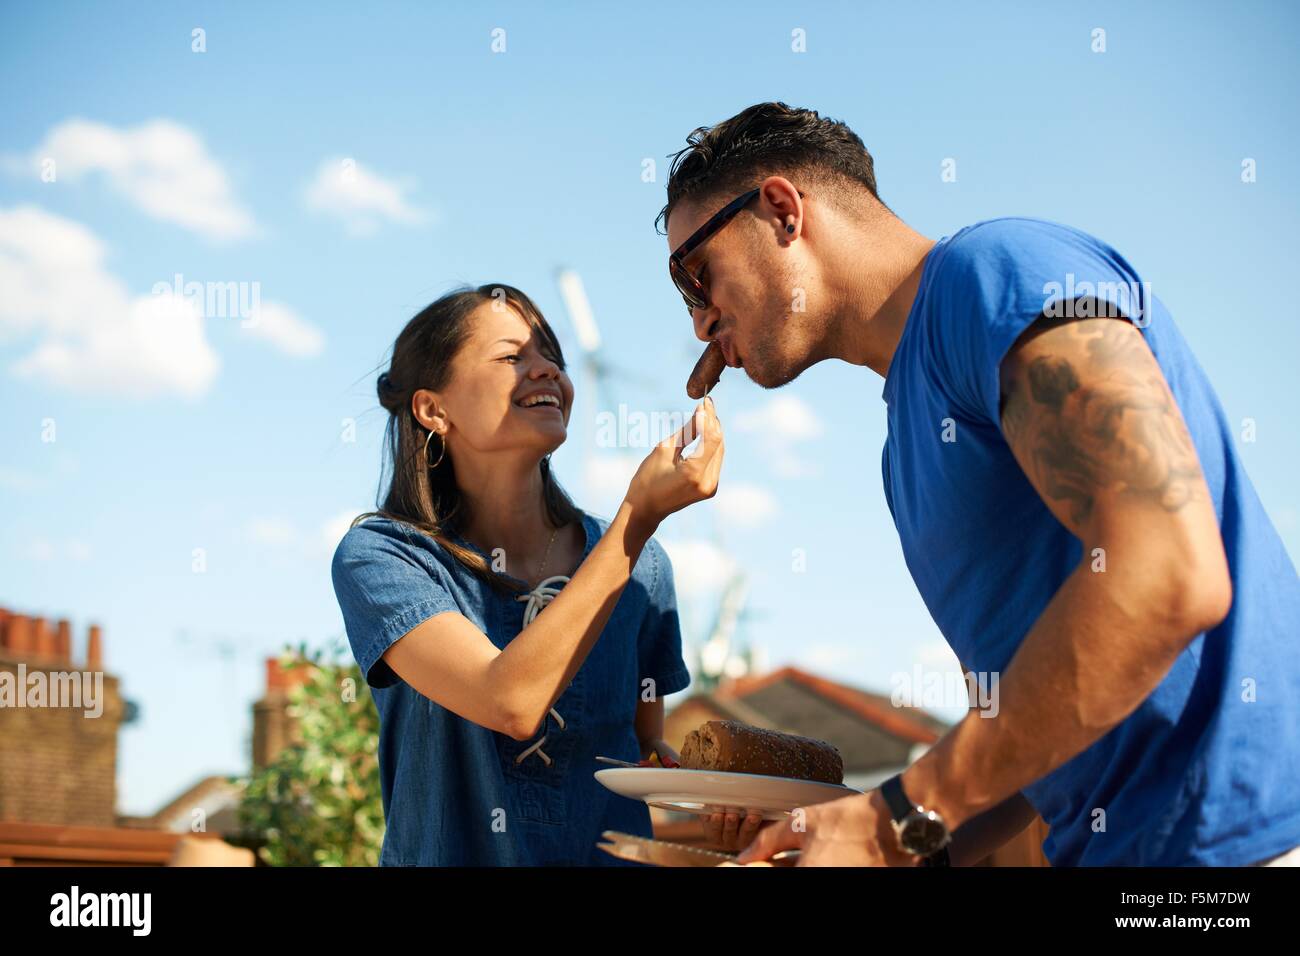 Mid adult woman feeding sausage to boyfriend at rooftop party Stock Photo